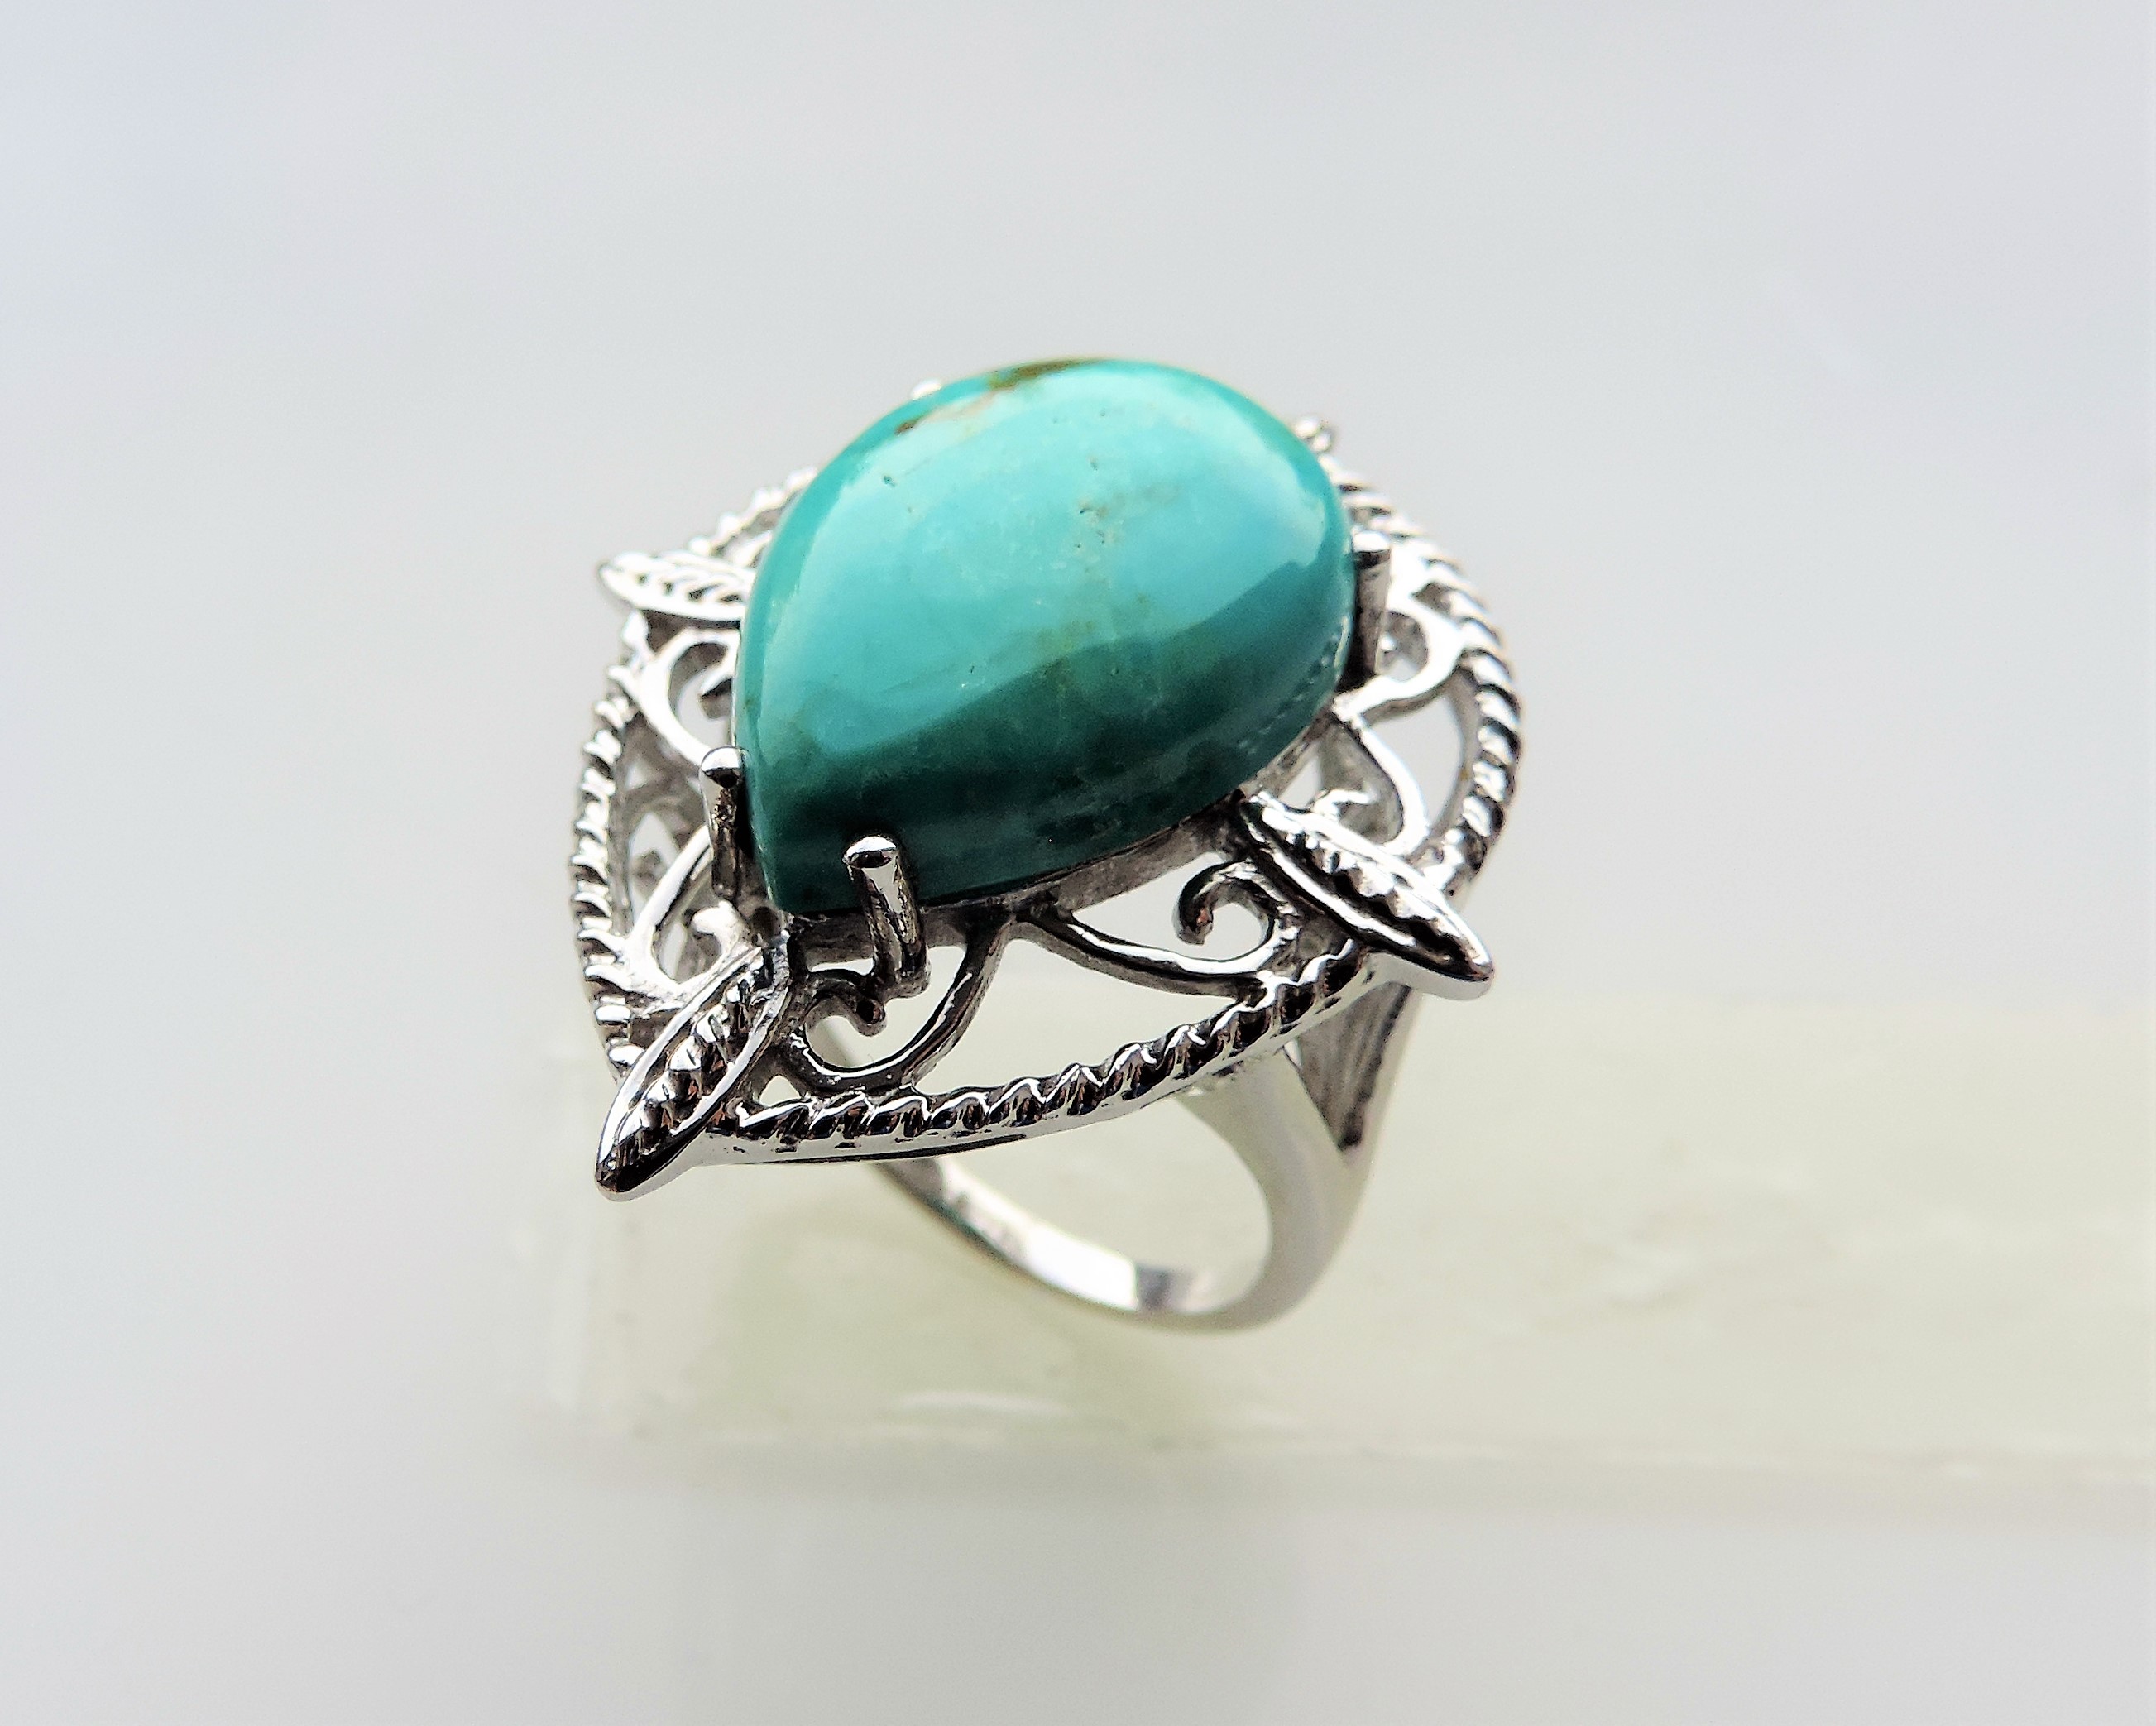 Turquoise Ring in Sterling Silver - Image 3 of 4